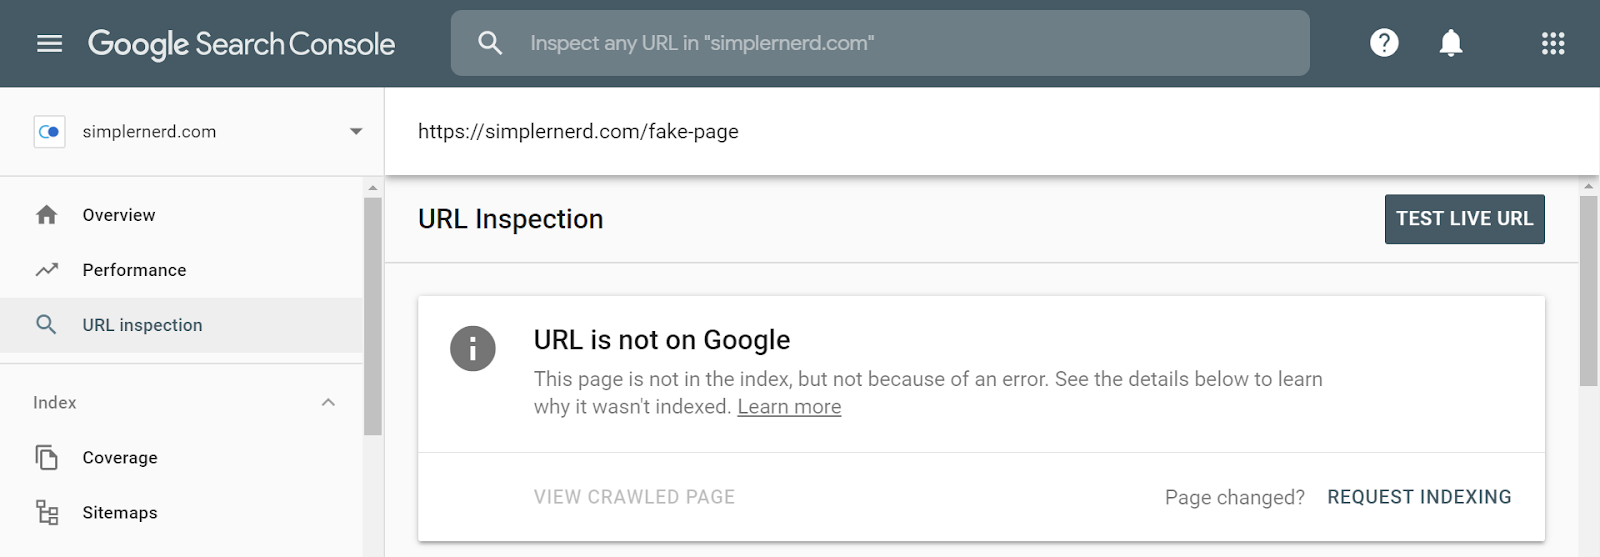 URL Indexed by Google